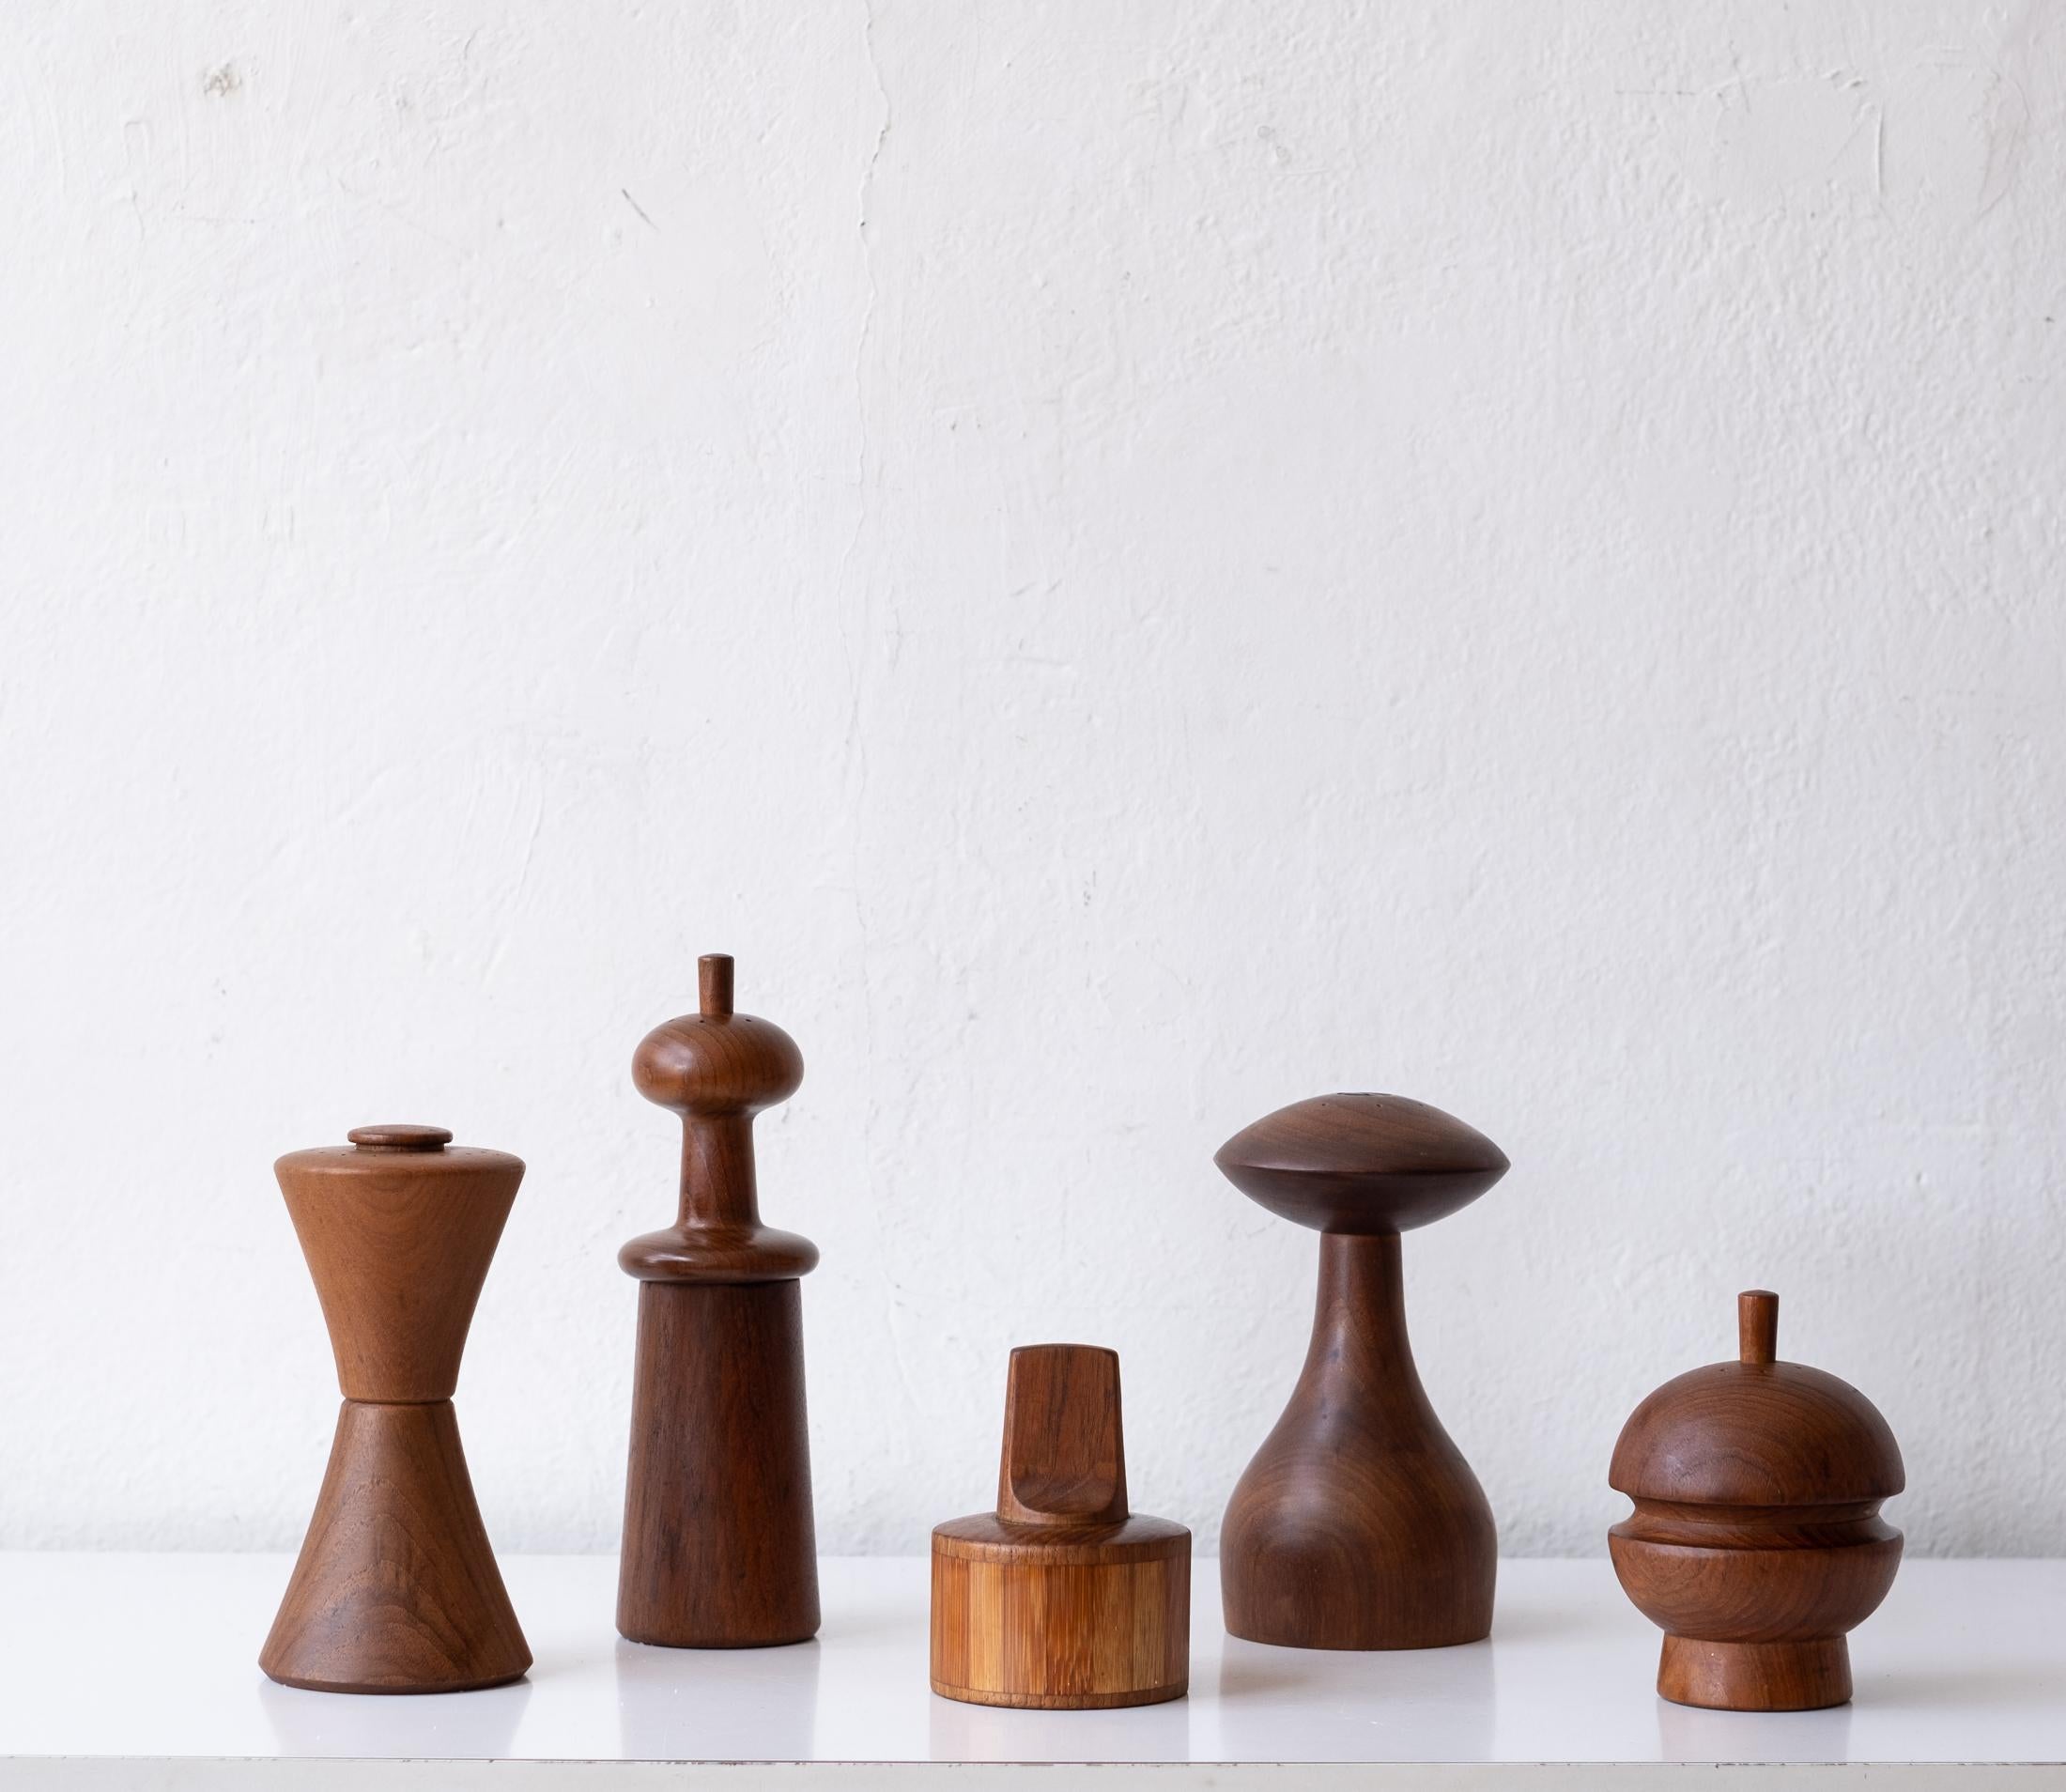 Collection of five teak pepper mills by Jens Quistgaard. Early metal grinding mechanisms produced by Peugeot. The mills were produced by Dansk in Denmark and one in Thailand (round one). Circa 1960s.